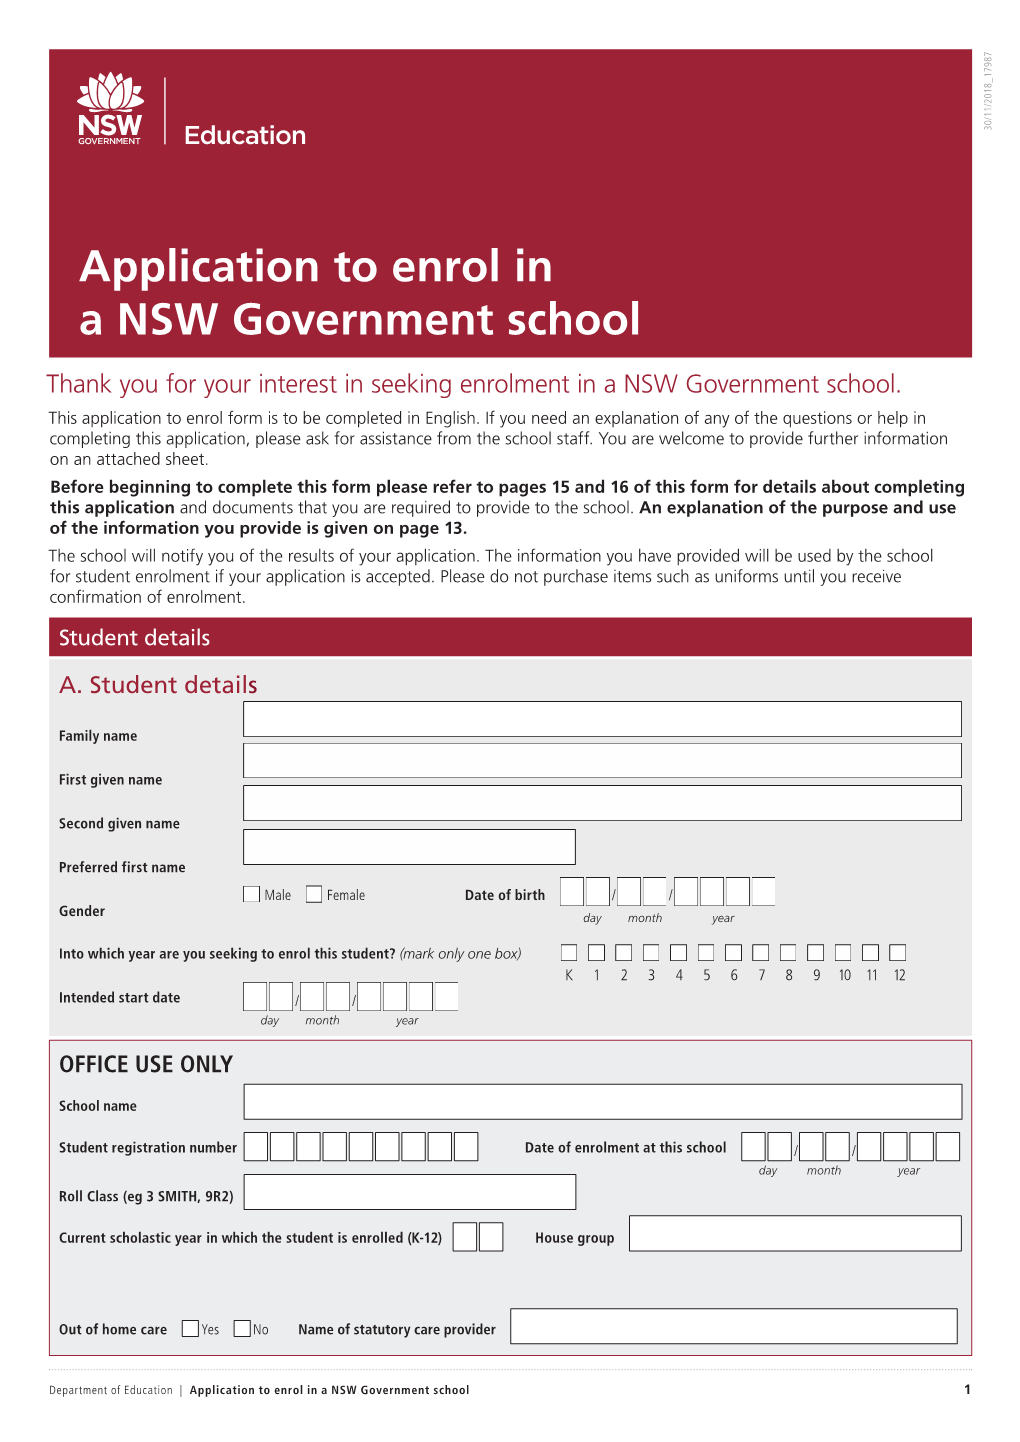 Application to Enrol in a NSW Government School